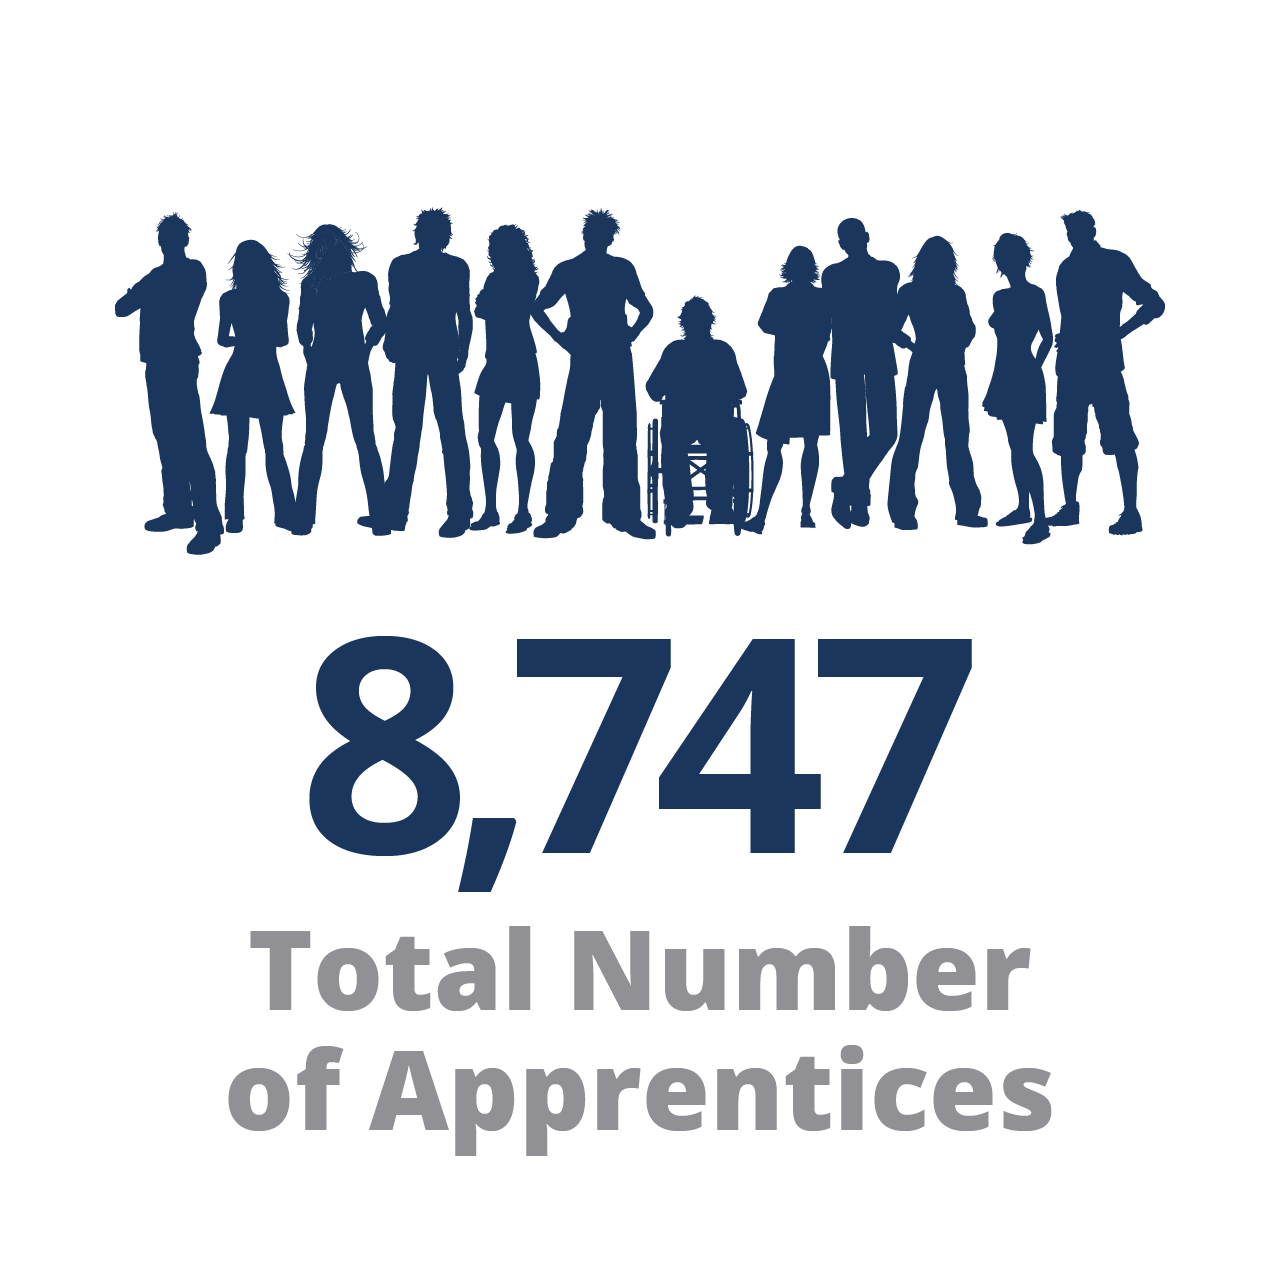 7,276 Total Number of Apprentices